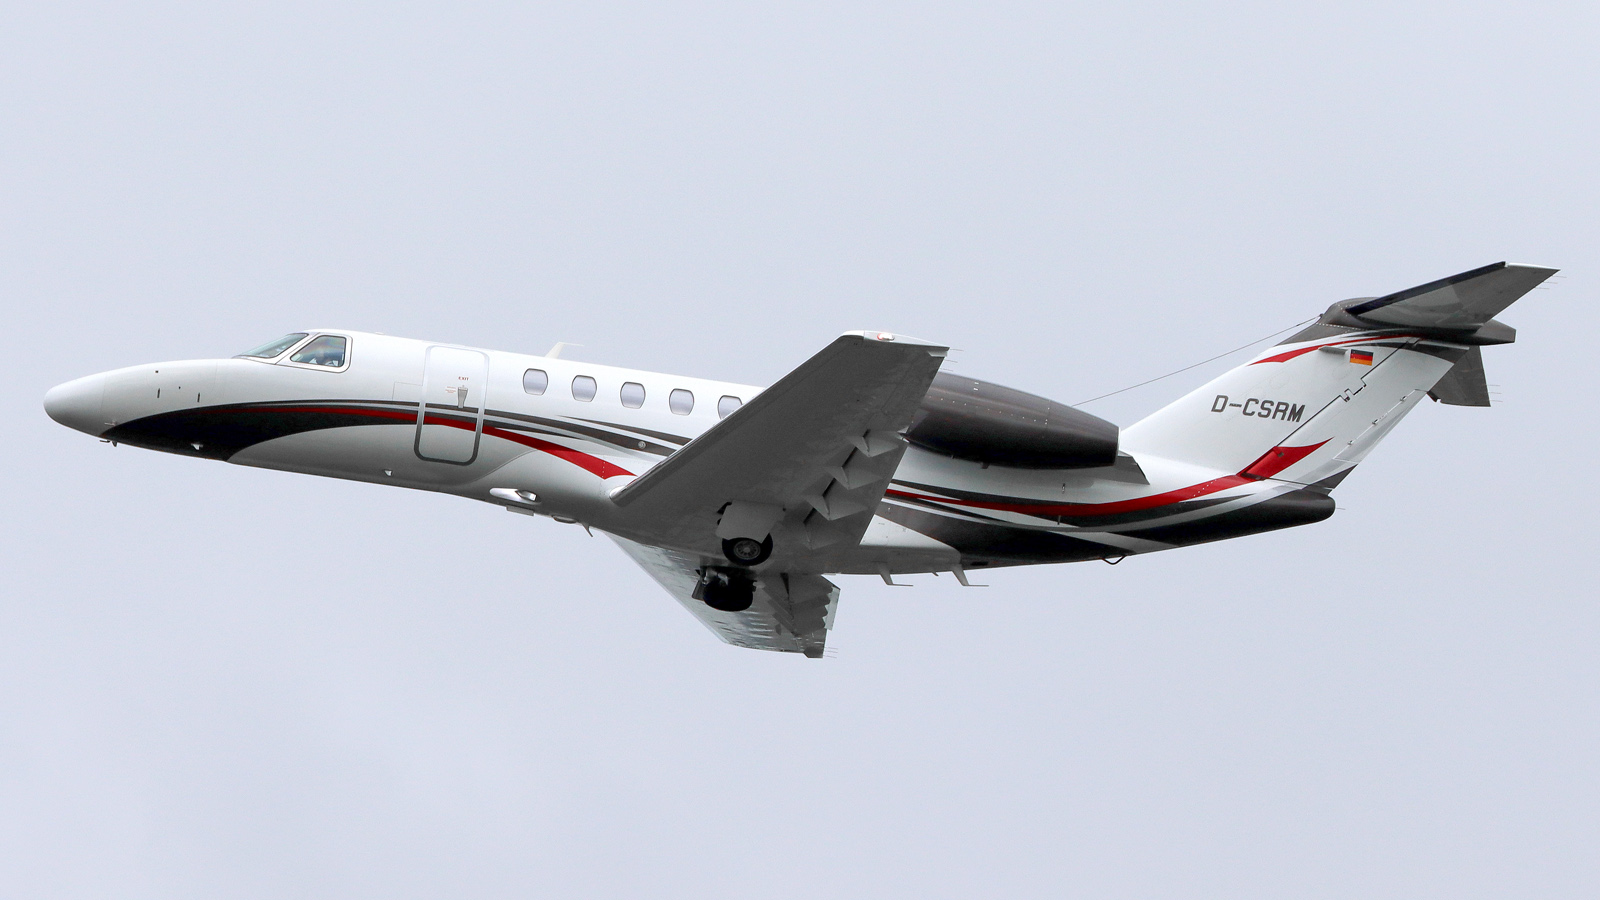 2021 Cessna Citation CJ4 G2 Private Jet (D-CSRM) From BAS Business Aviation Services On AvPay aircraft exterior in flight